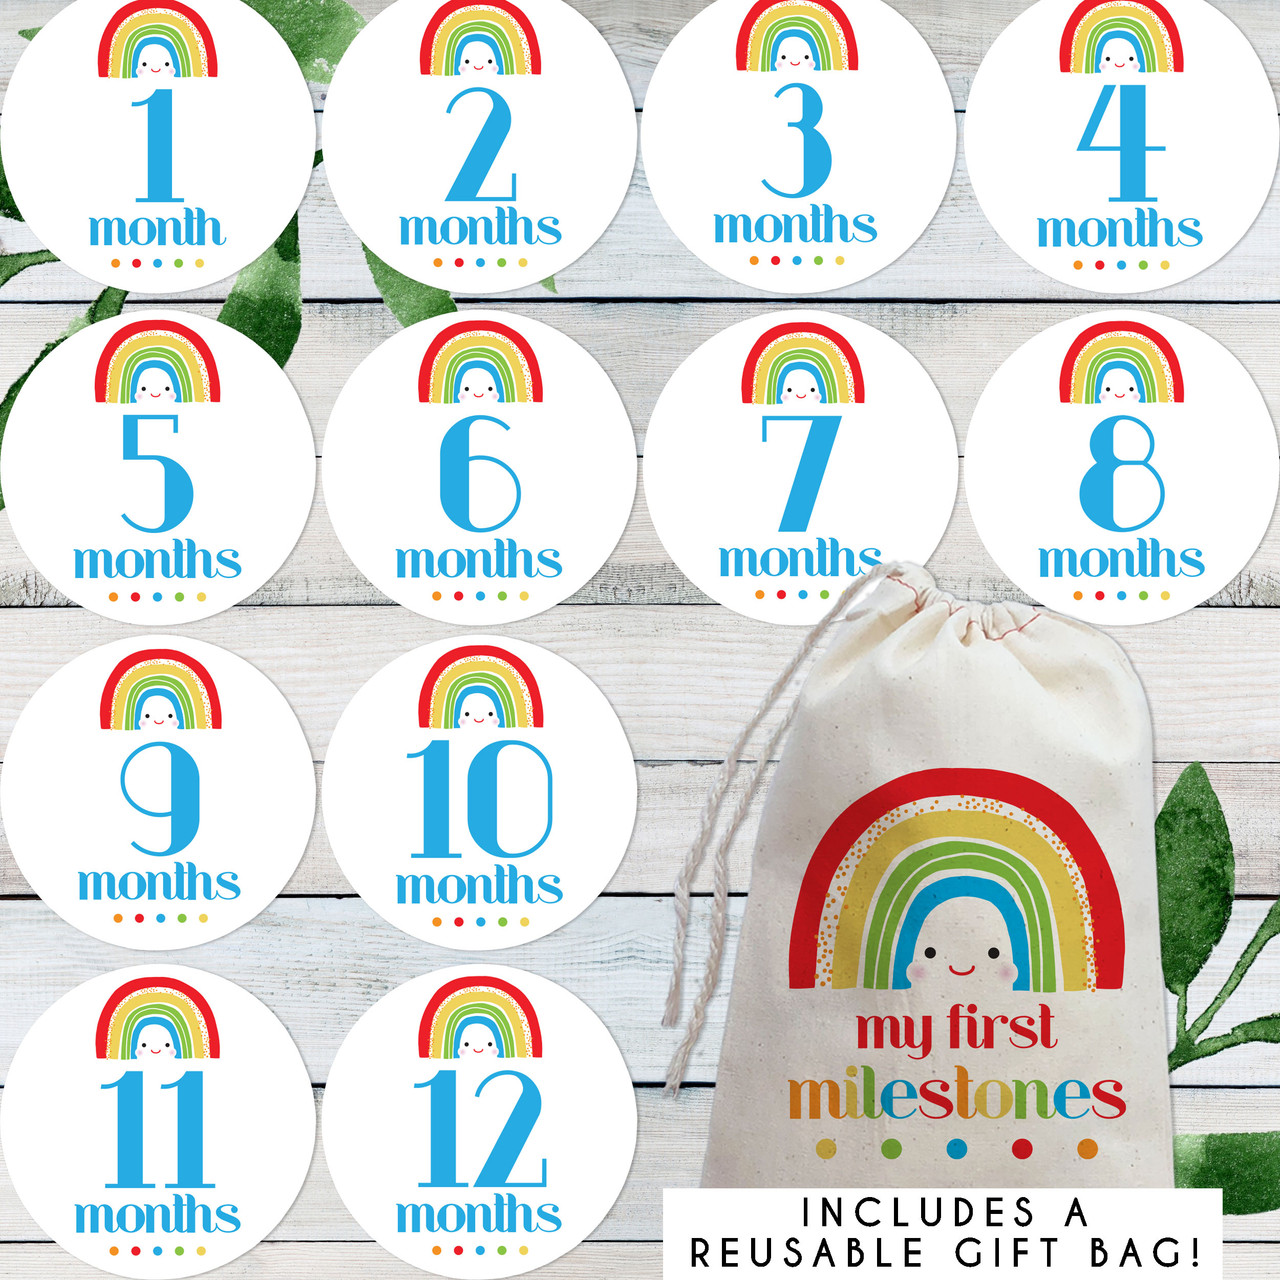 https://cdn11.bigcommerce.com/s-5grzuu6/images/stencil/1280x1280/products/4977/52831/Happy_Rainbow_Set_of_12_Wooden_Baby_Month_Photo_Signs__34117.1675193012.jpg?c=2